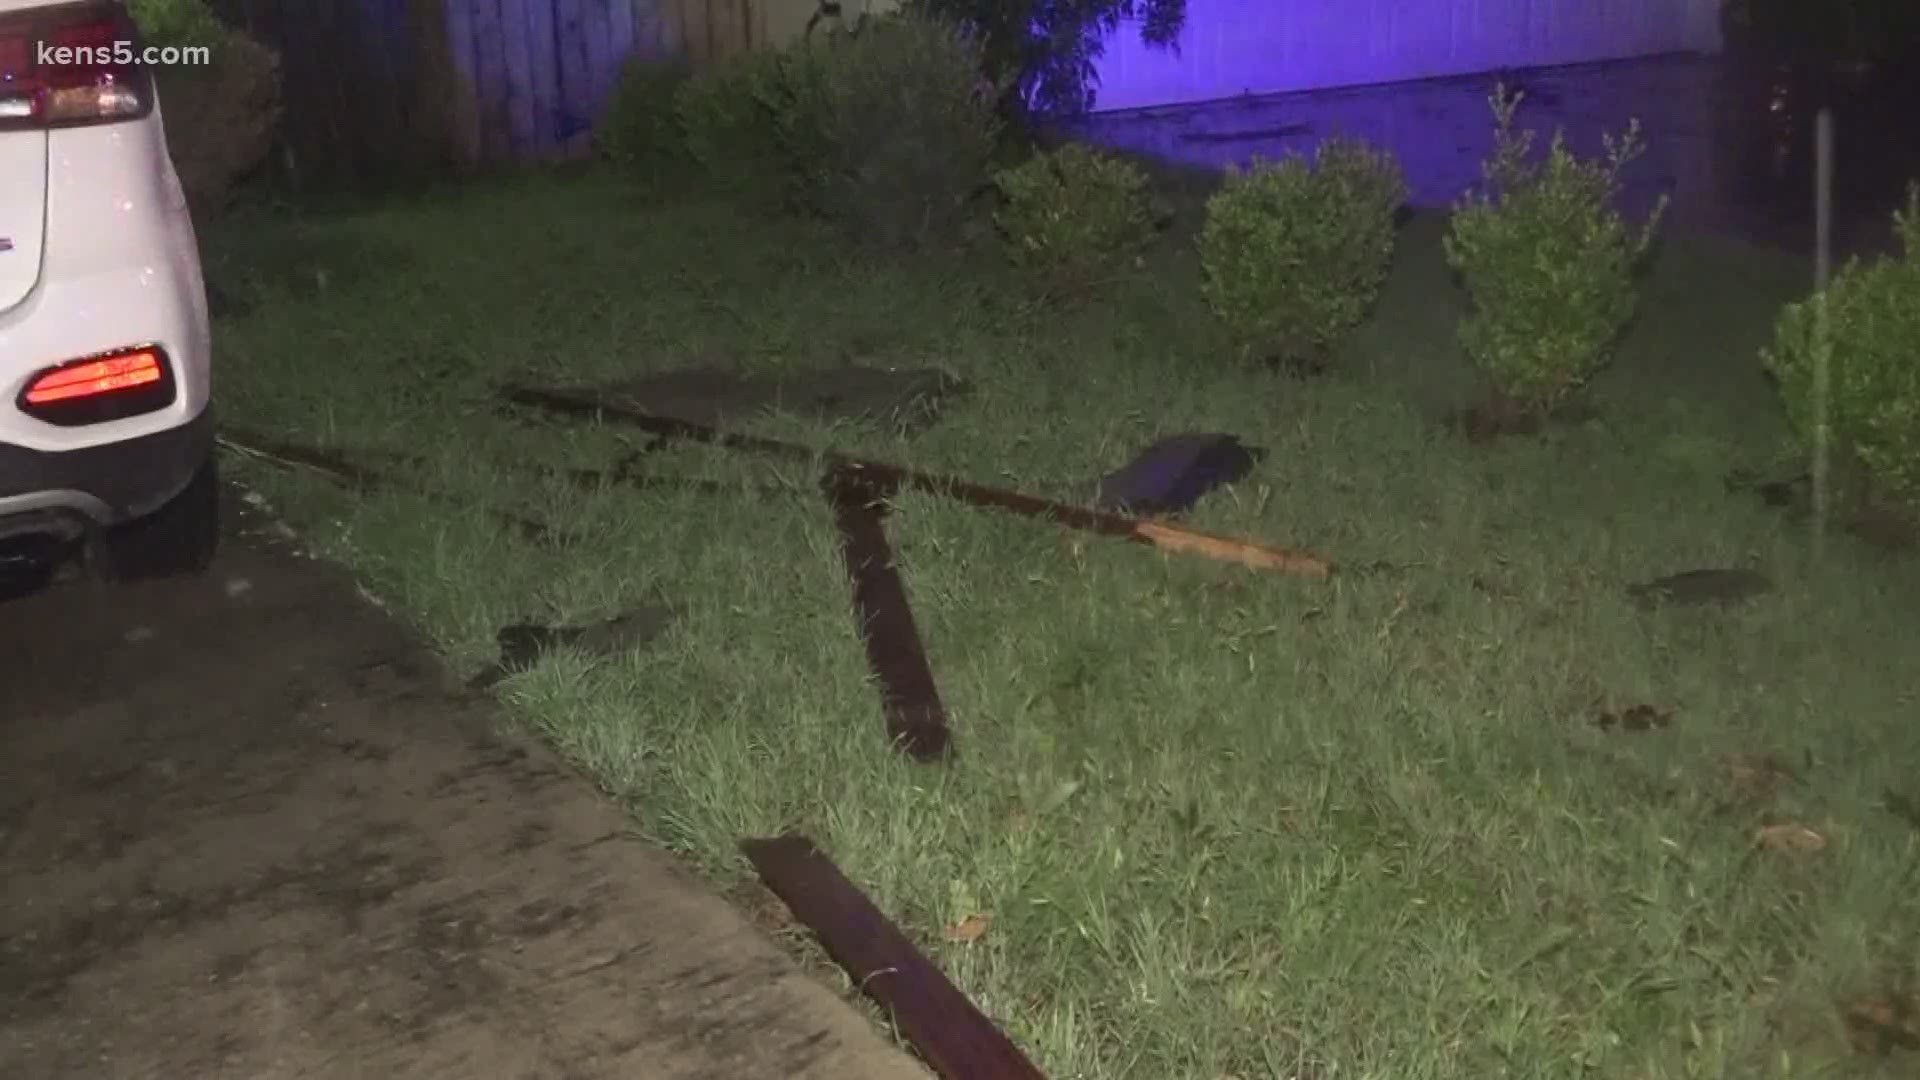 Storms pounded thousands of homes, leaving a big mess in dozens of neighborhoods all over the area. We're taking a look at the damage as the sun rises.